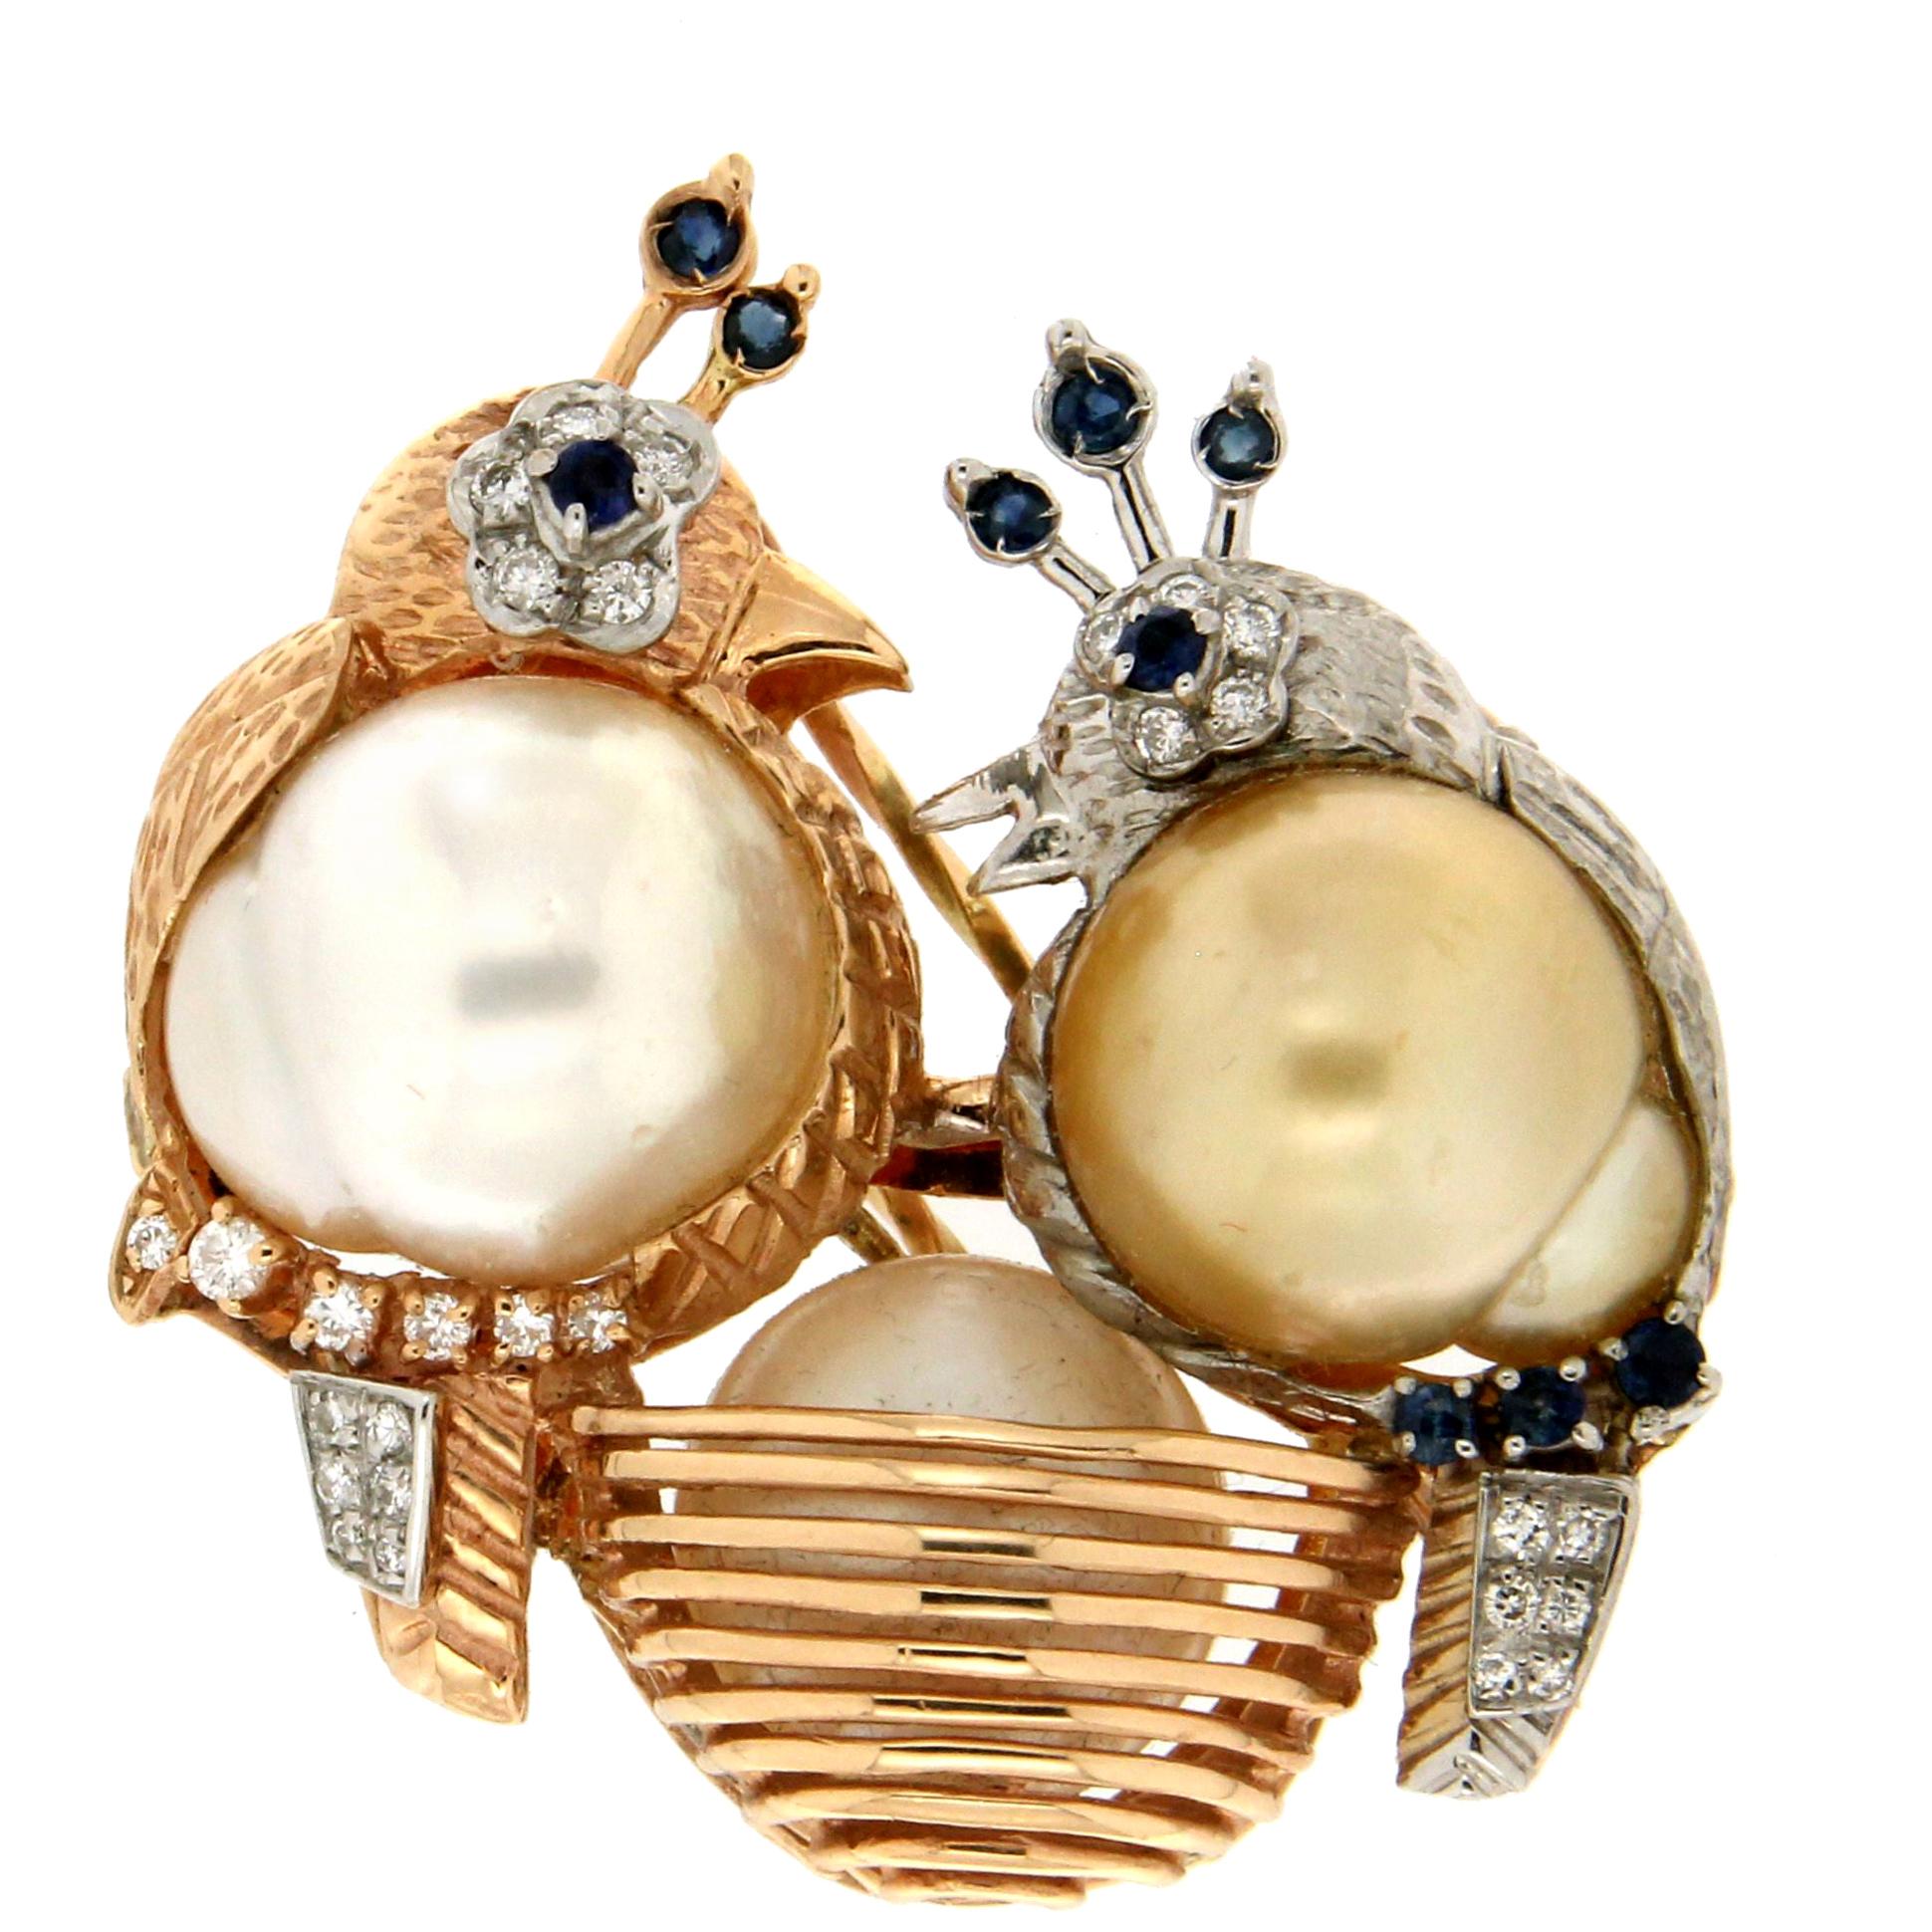 Handcraft Birds 14 Karat White and Yellow Gold Pearls Diamonds Sapphires Brooch For Sale